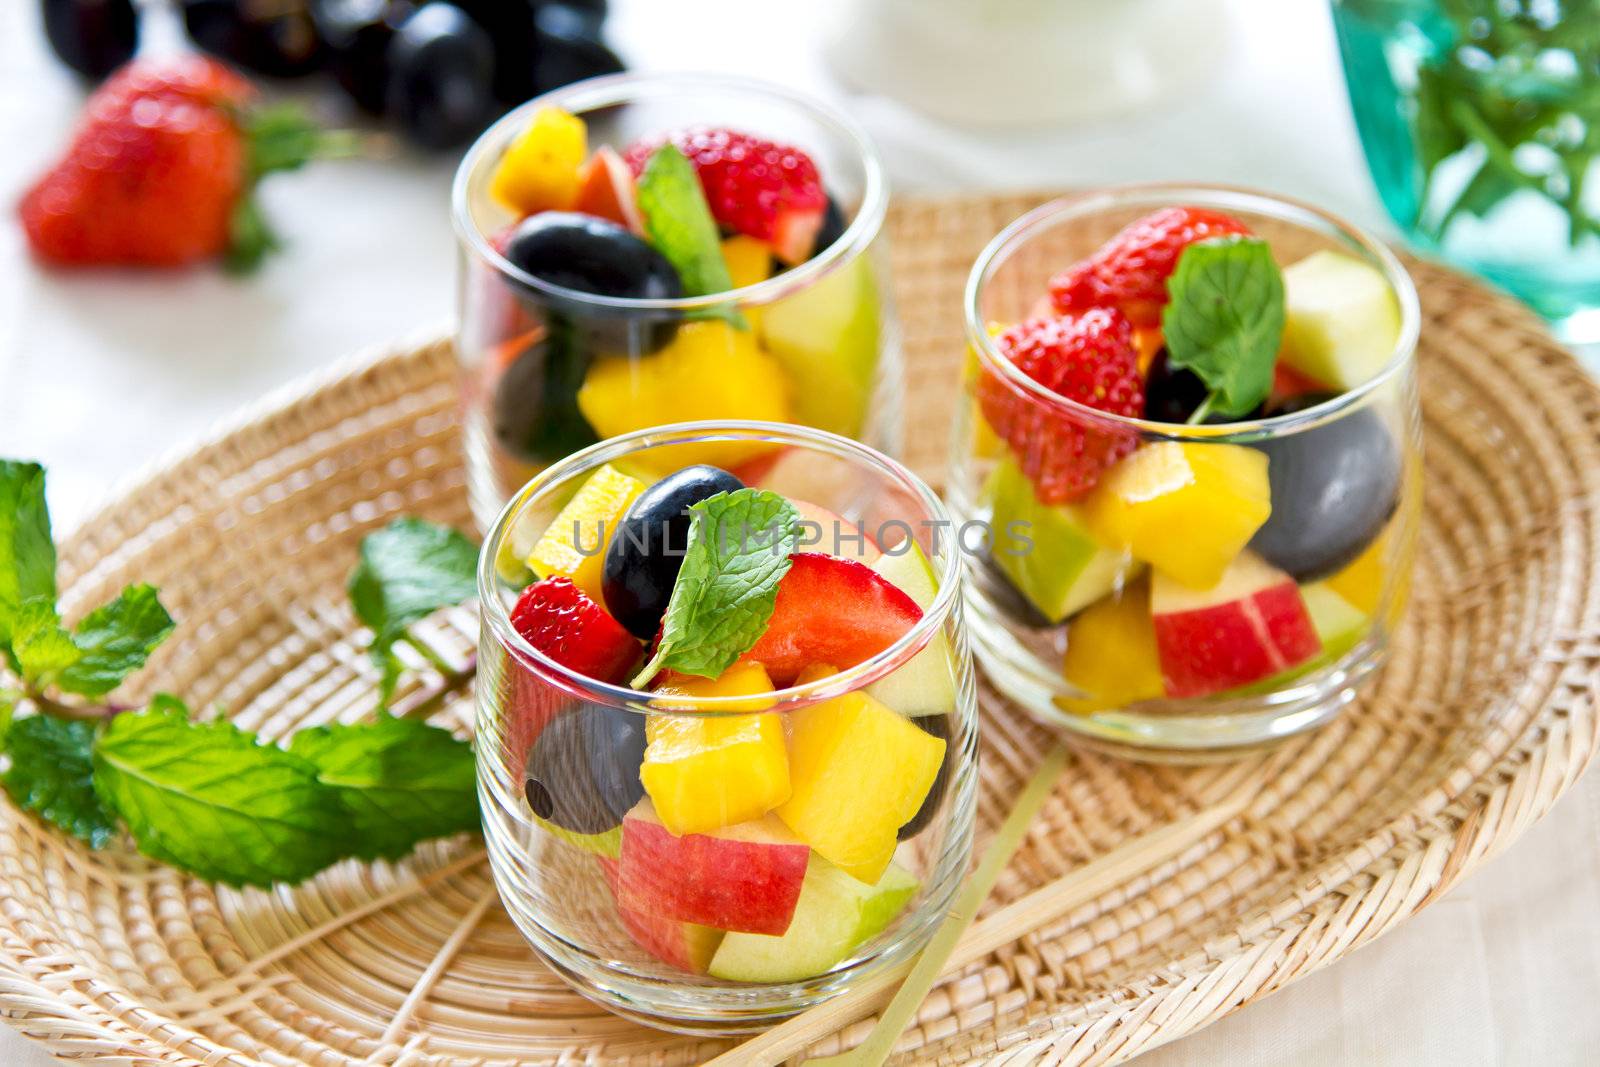 Varieties of fruits salad in small glass